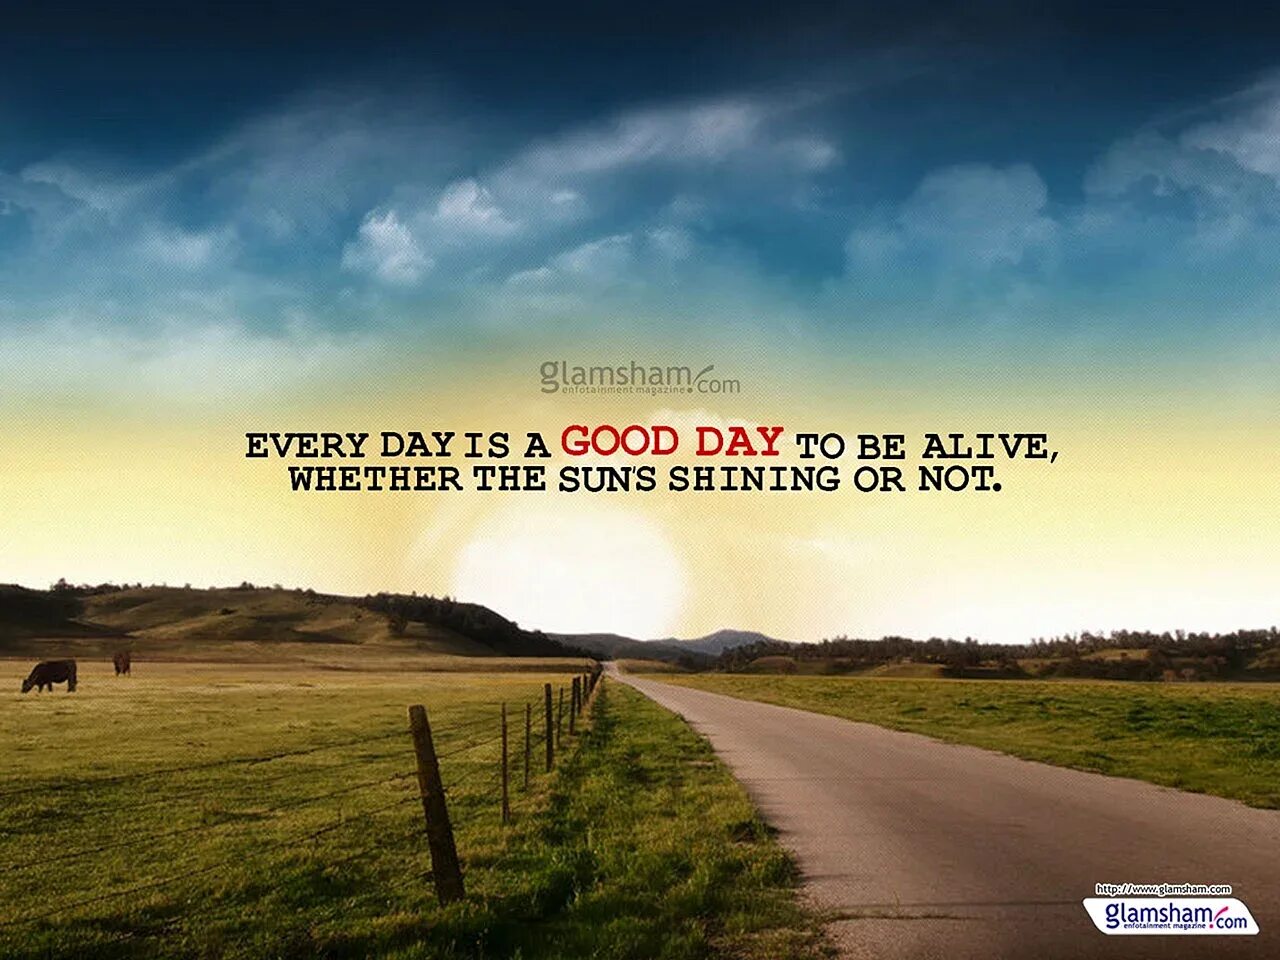 Better every day. Every Day good Day. Everyday is a good Day. Обои better every Day. Good Day заставка.